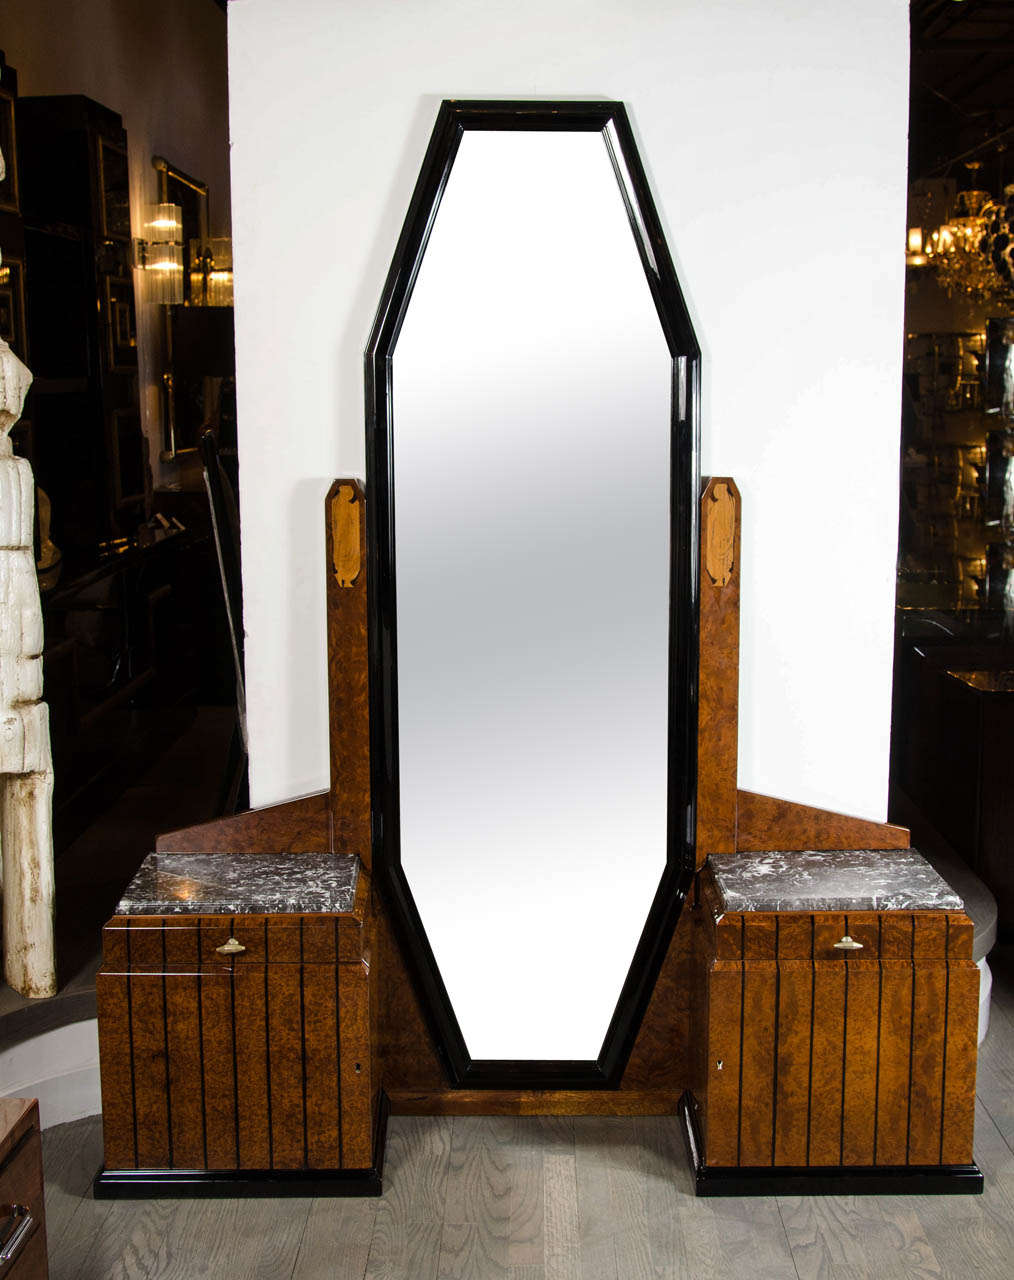 This elegant Art Deco floor-standing vanity or dressing mirror in book-matched burled elm features strong skyscraper Art Deco cubist geometric details, a full length octagonal mirror flanked by two exotic marble-top cabinets, each fitted with a